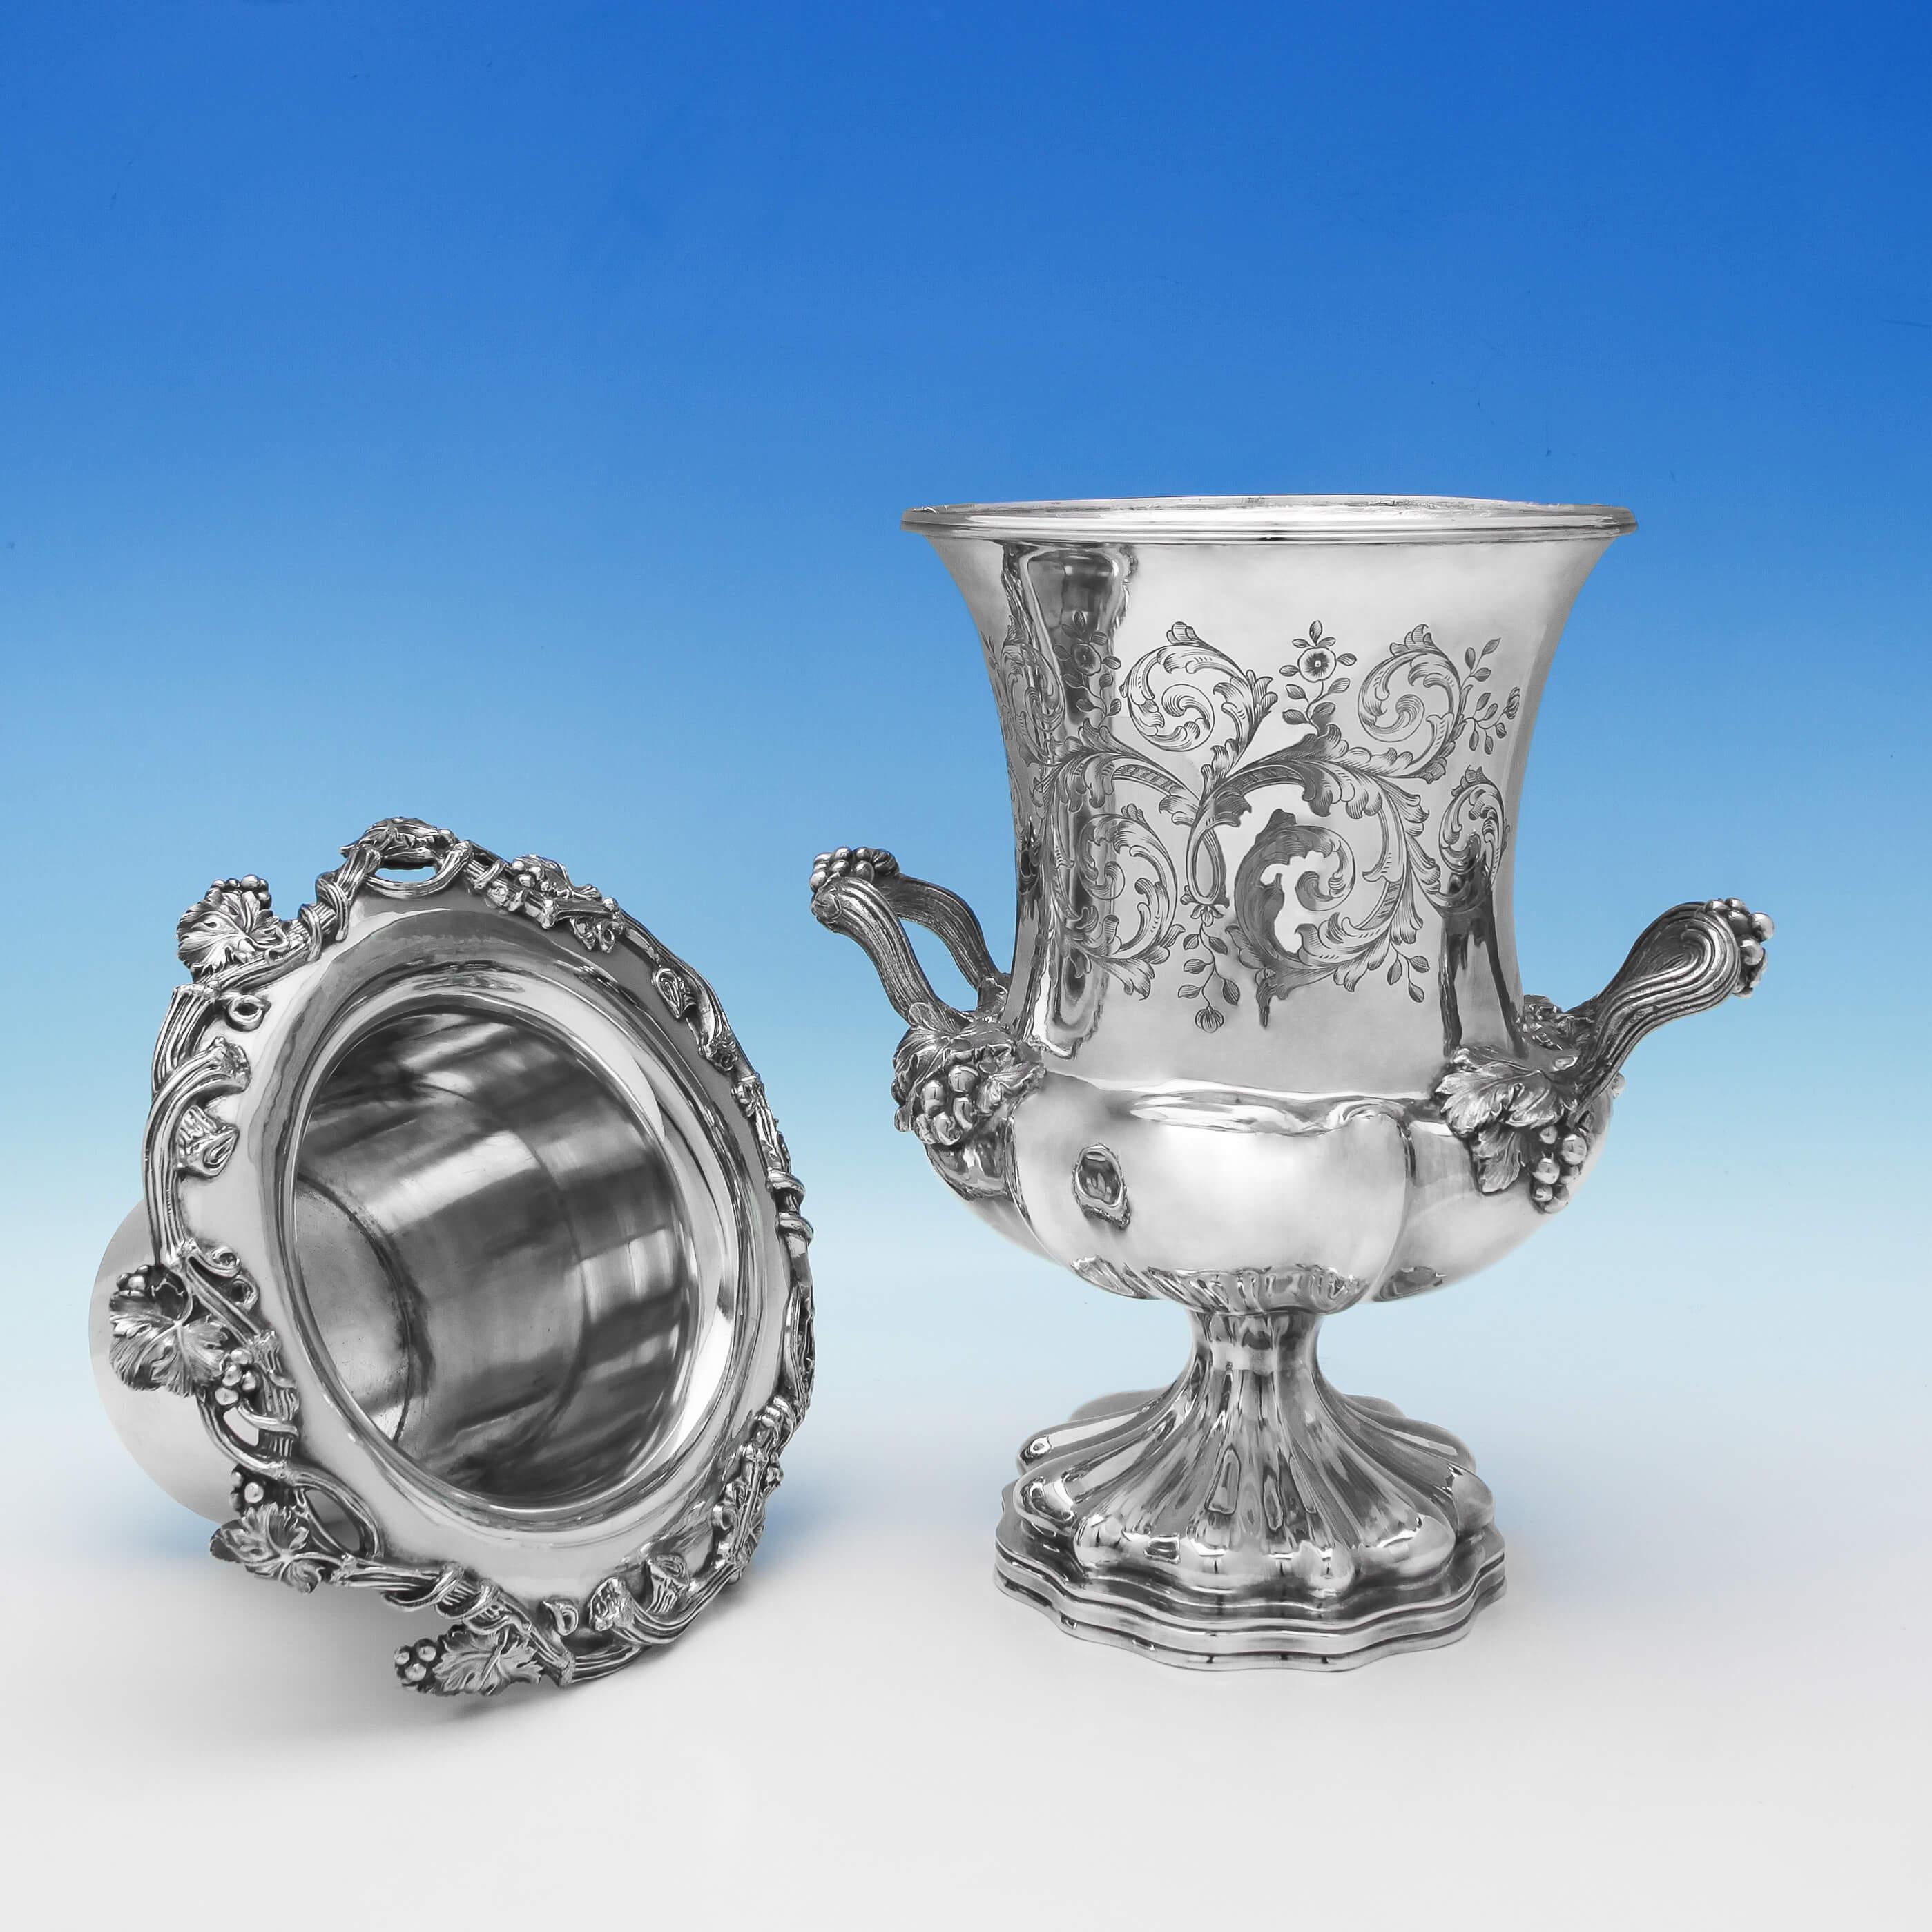 Made in 1845 by Elkington Mason & Co., this fantastic pair of antique, Victorian, silver plate wine coolers feature original crests, grape and vine decoration, acanthus handles and campana shape bodies with floral and scroll engraving. They have